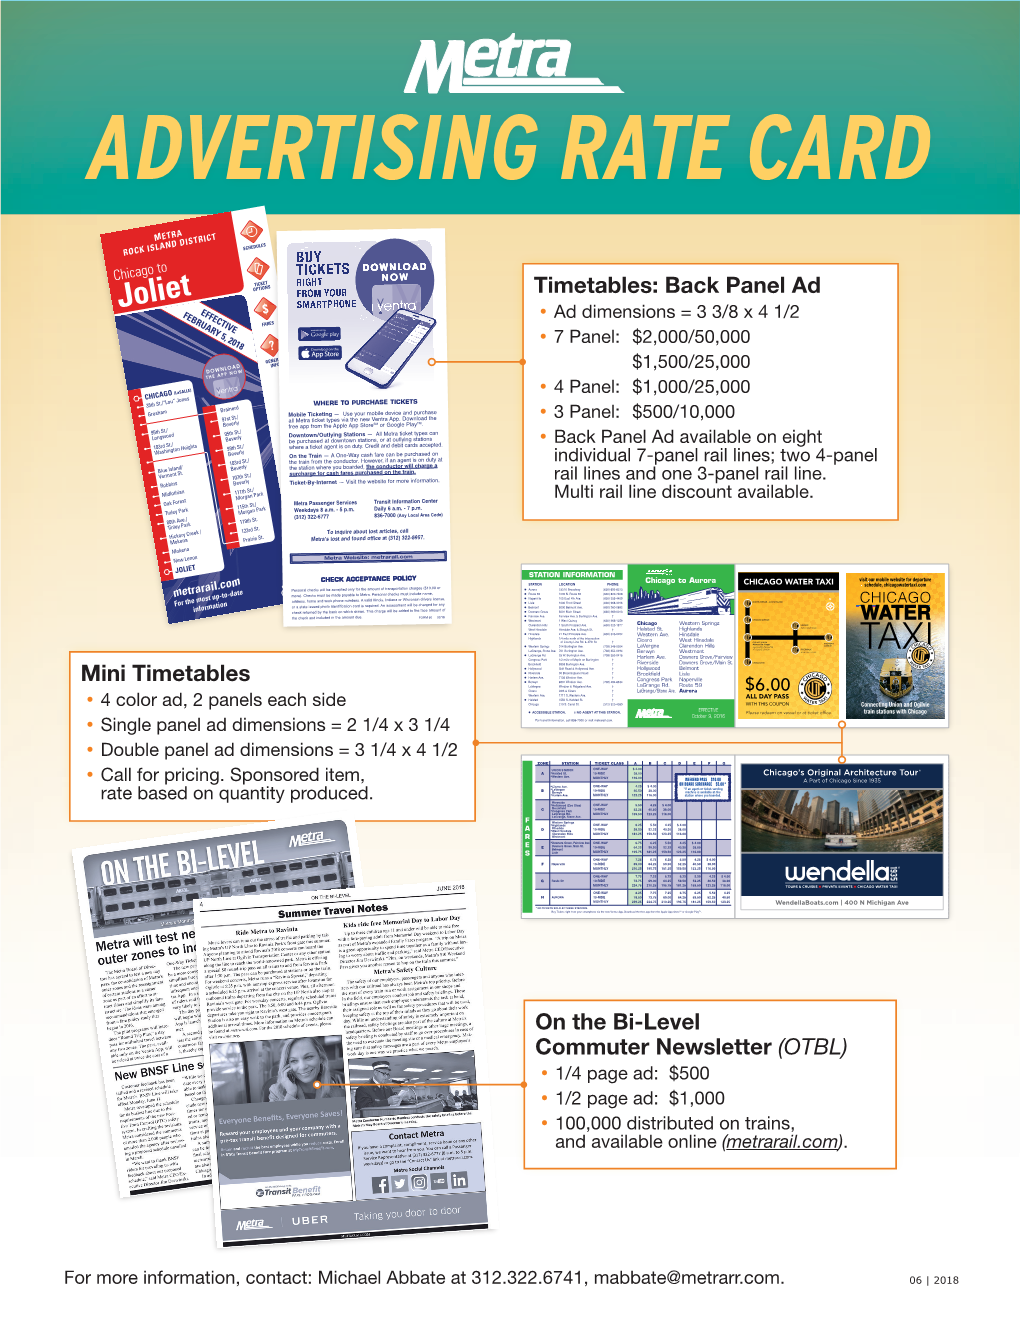 Advertising Rate Card